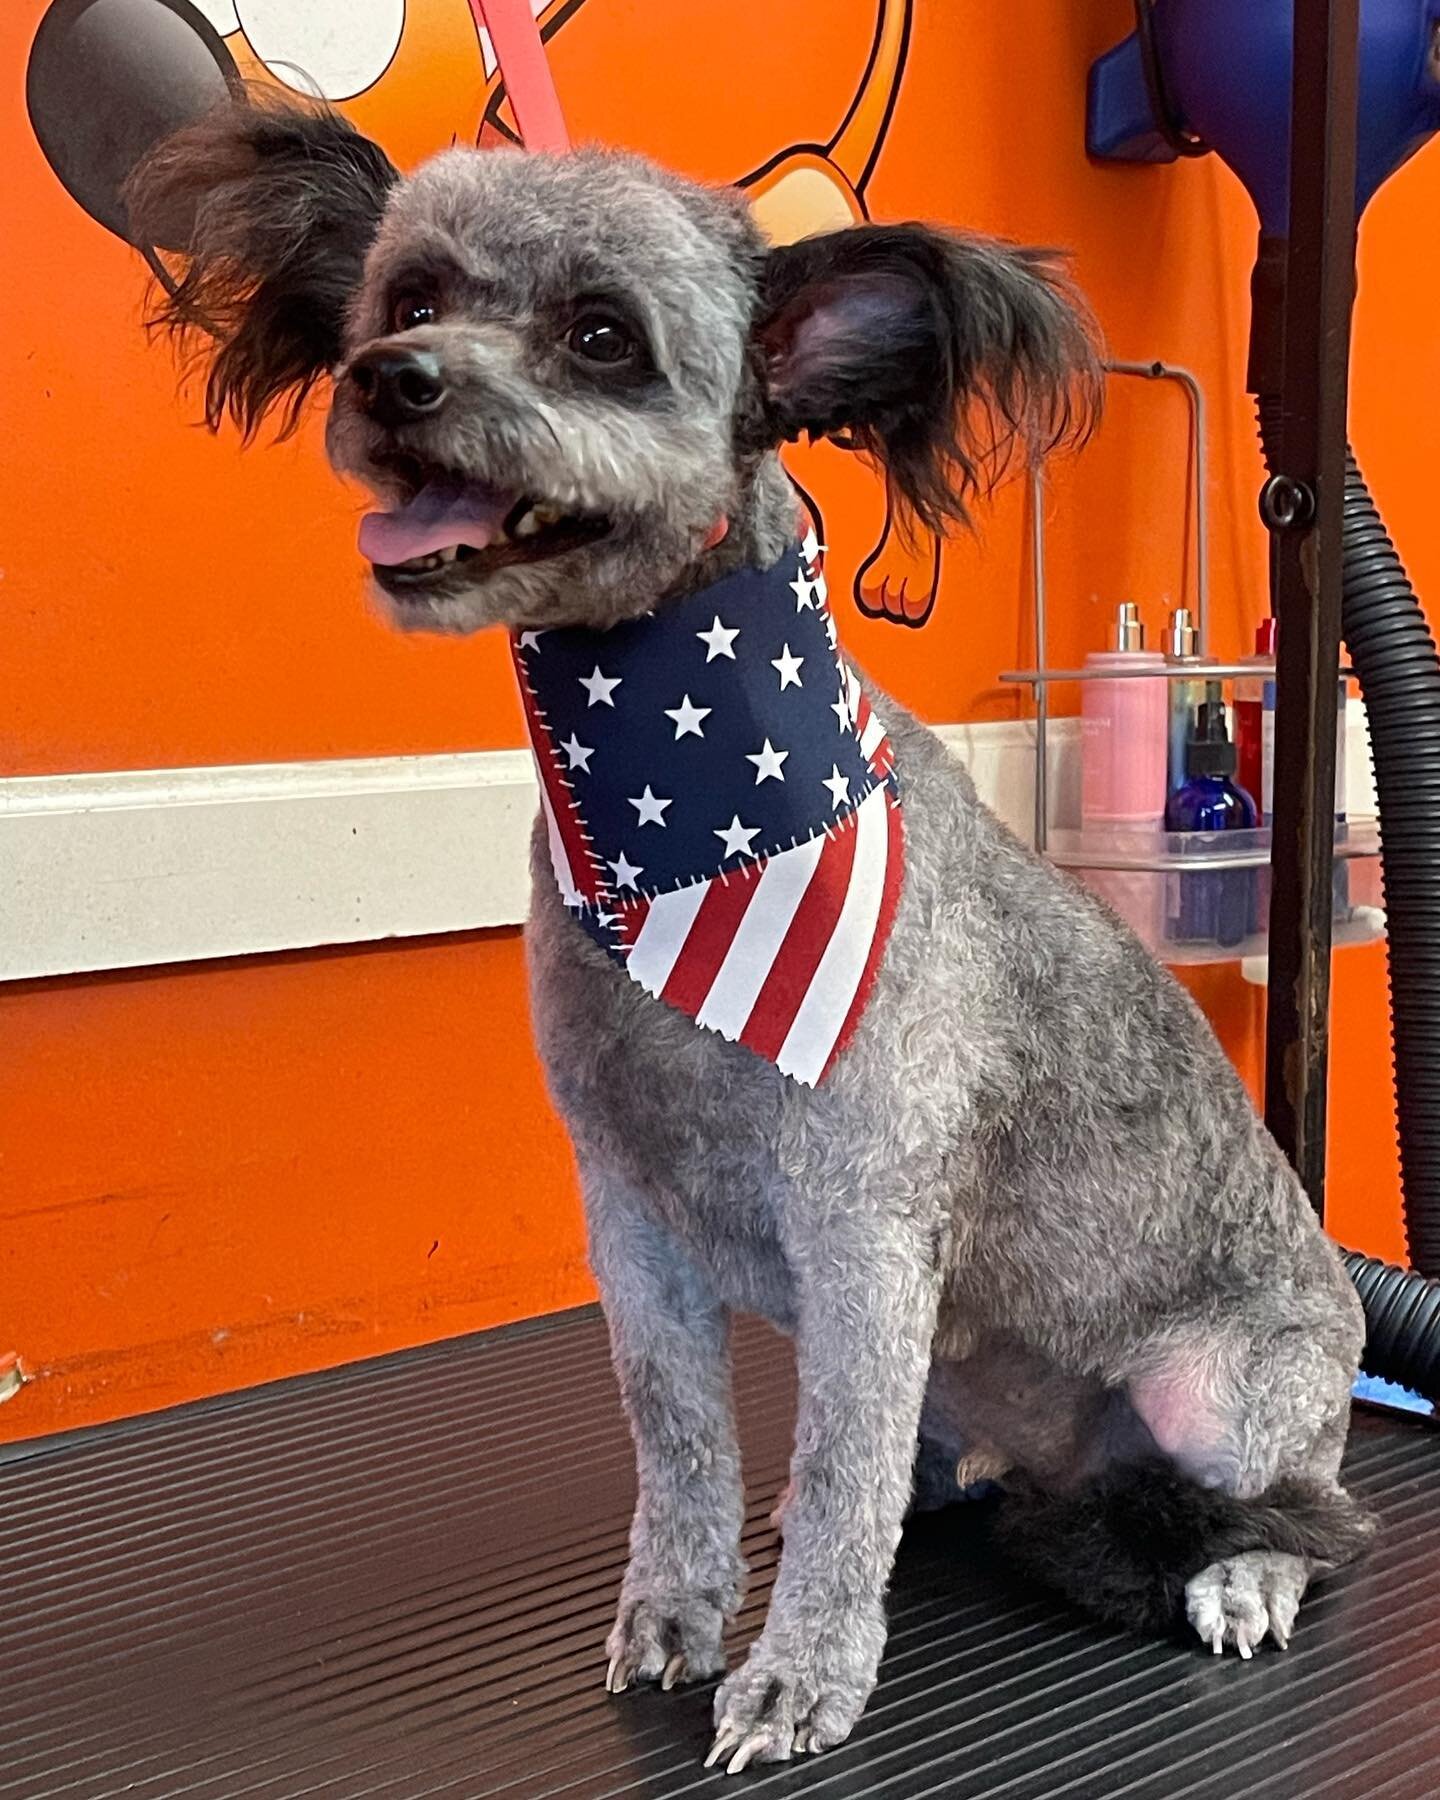 🇺🇸🇺🇸🇺🇸
Happy Wednesday 🎆

This pup is looking sooo good, ready to enjoy the start of summer!

Although this pup looks good we unfortunately were not unable to cut its nails, this pup was was not letting one of our groomers cut its nails. 

We 